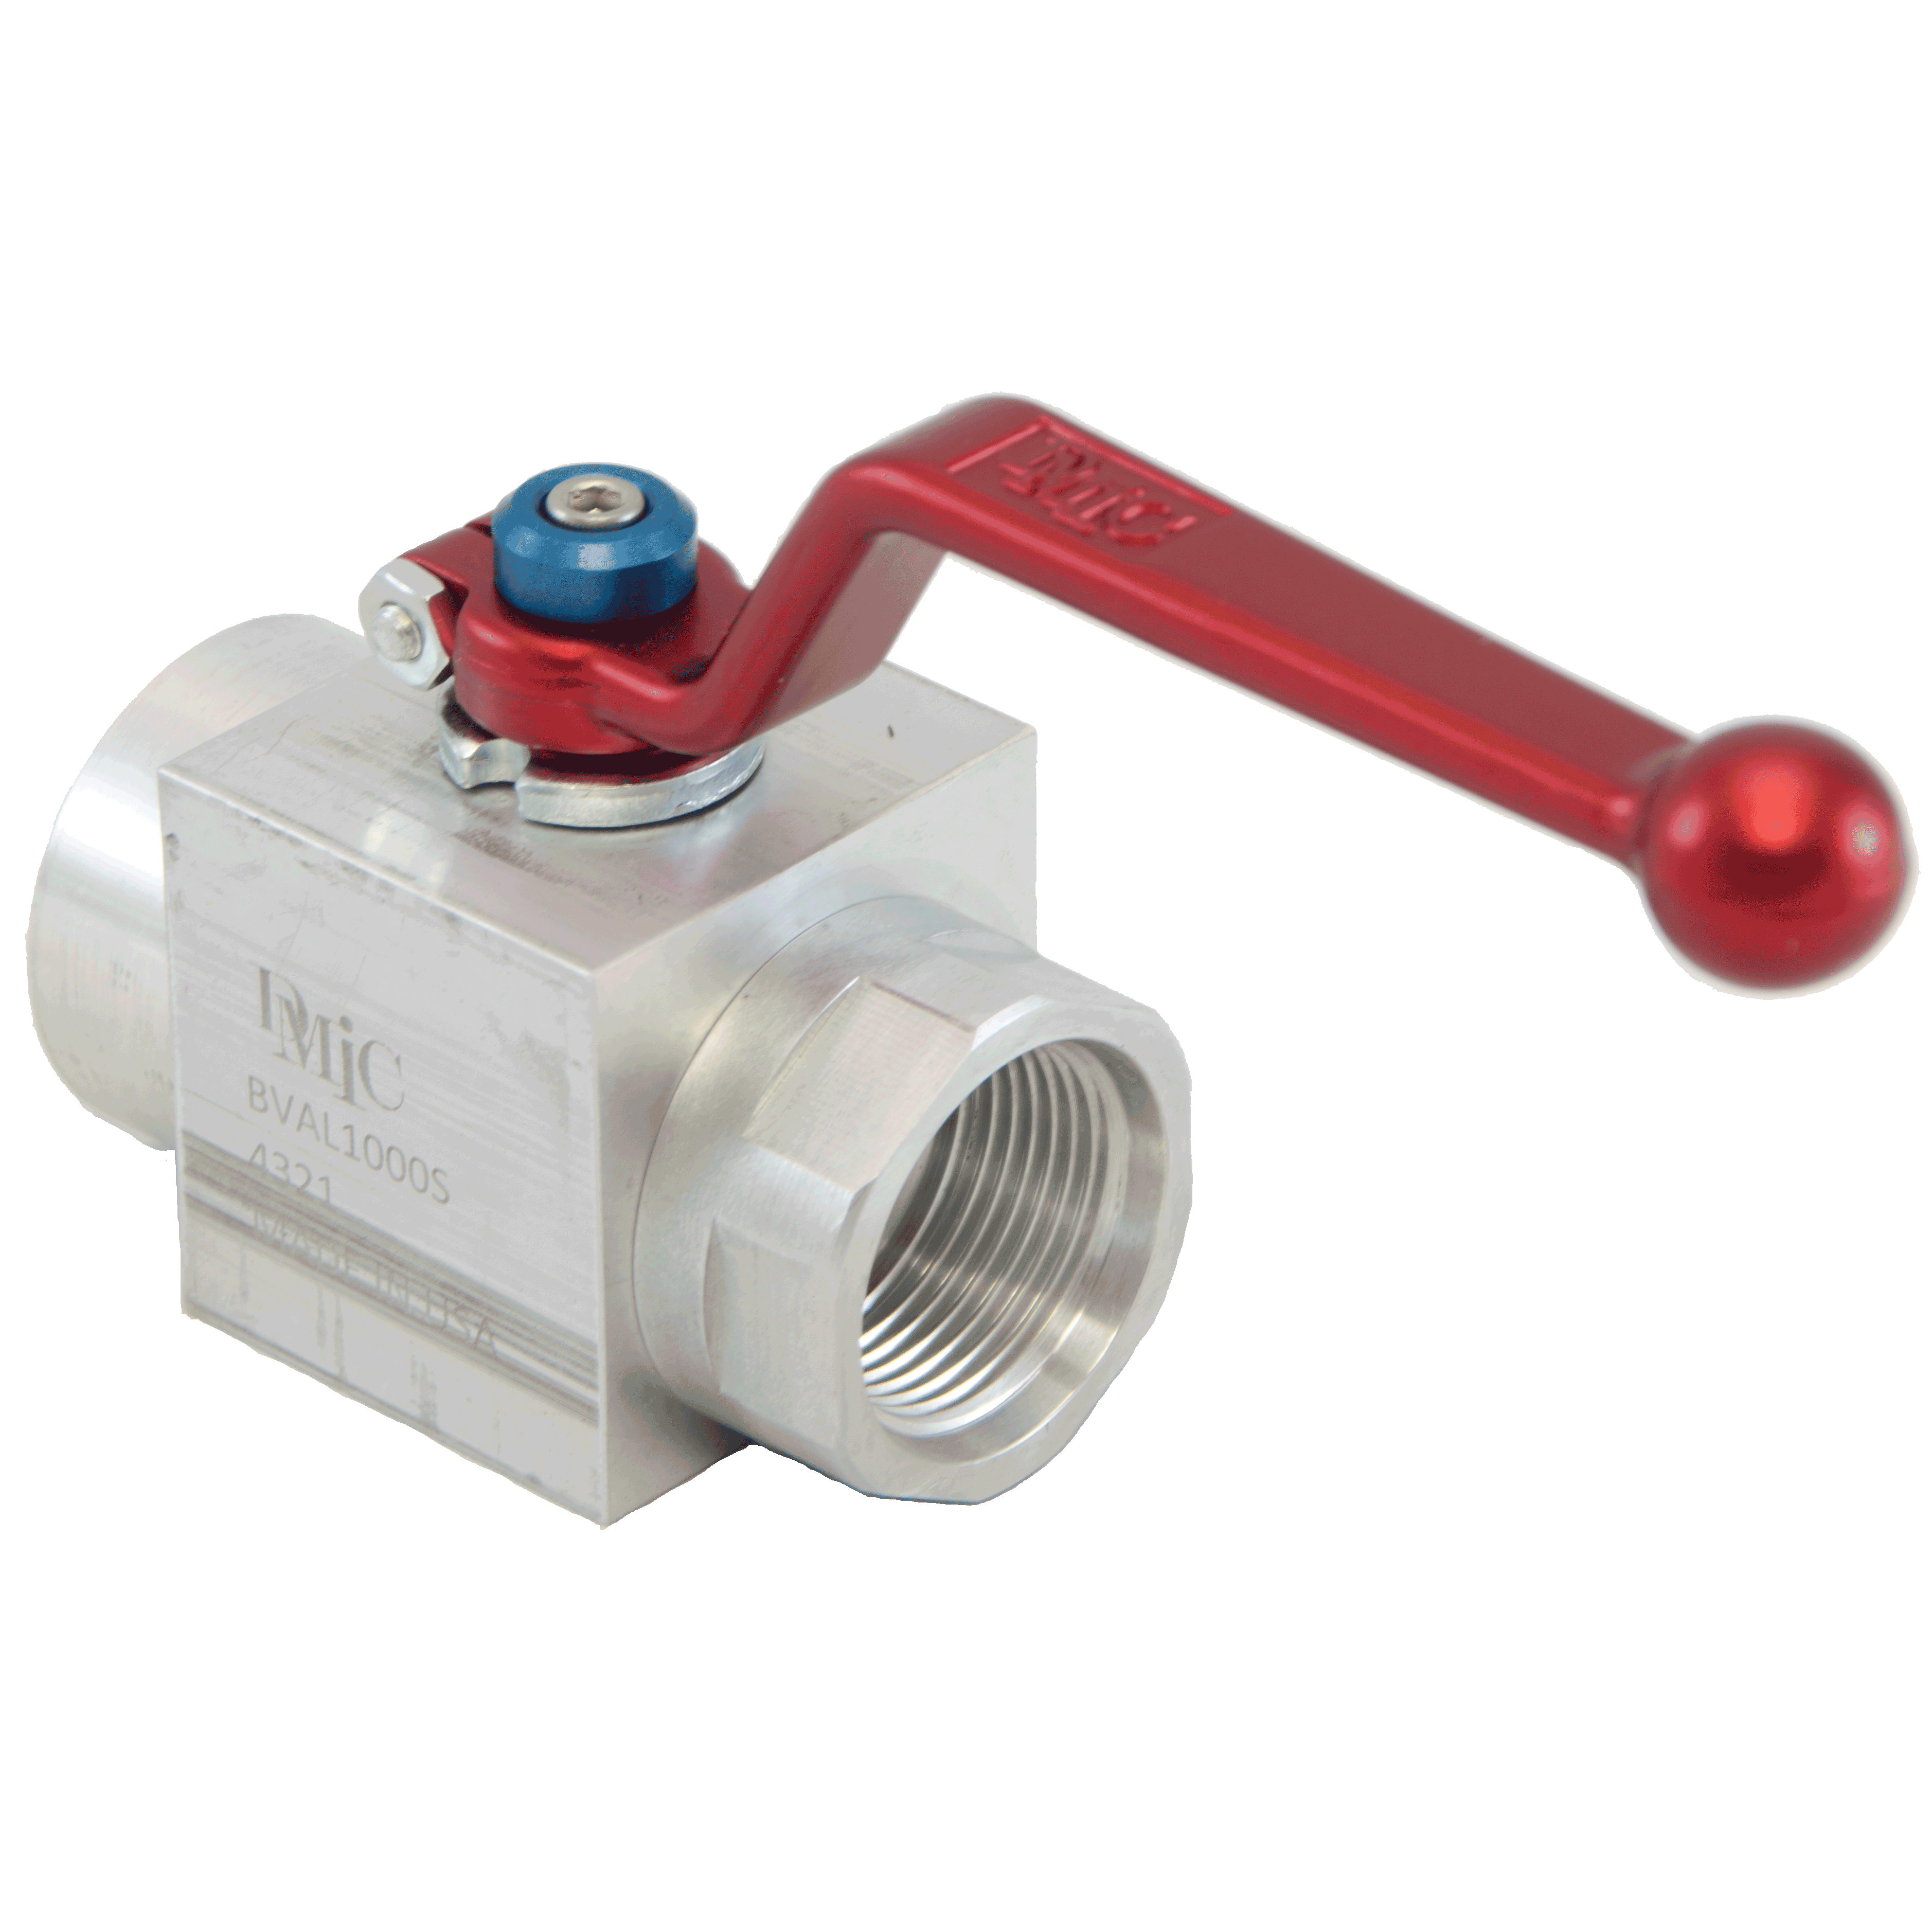 BVAL-2000N-4321-AZZN : DMIC Suction Ball Valve, 2 NPT, Aluminum, 600psi, Two-Way, with Locking Handle